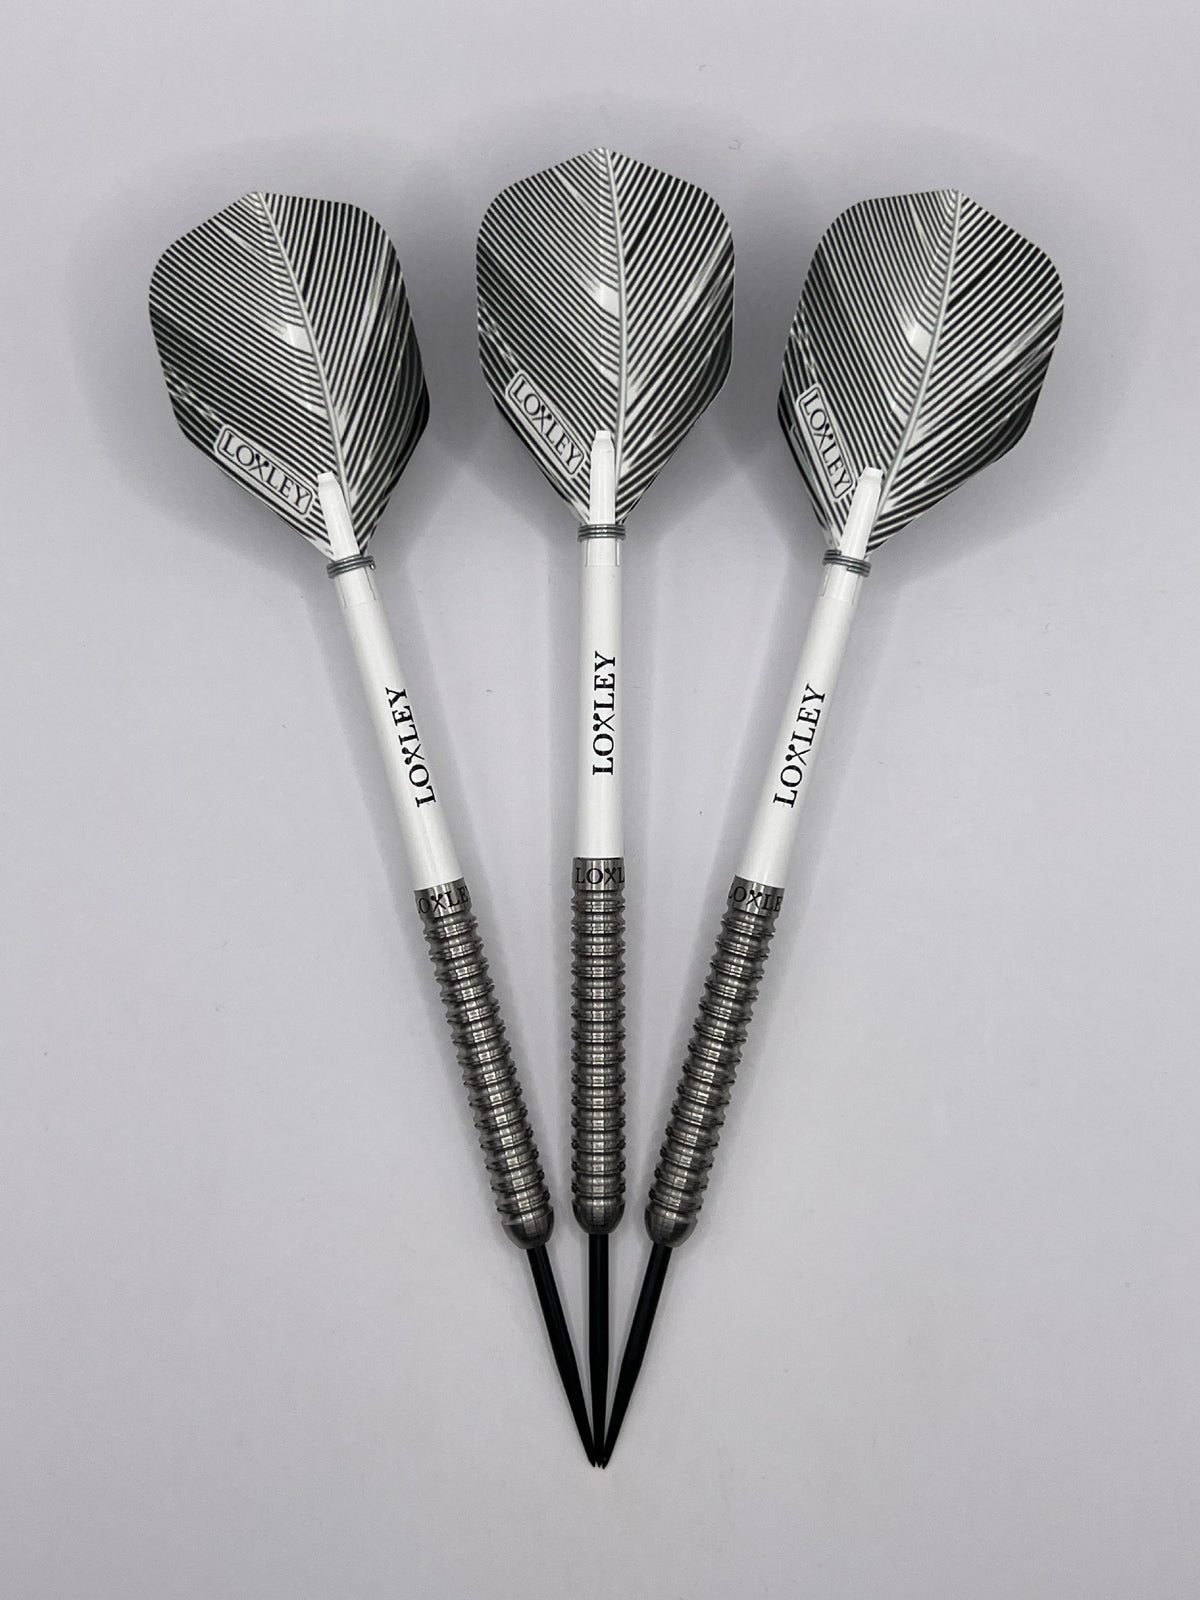 LOXLEY - Loxley 'Featherweight' Darts - Steel Tip - Black - 16g